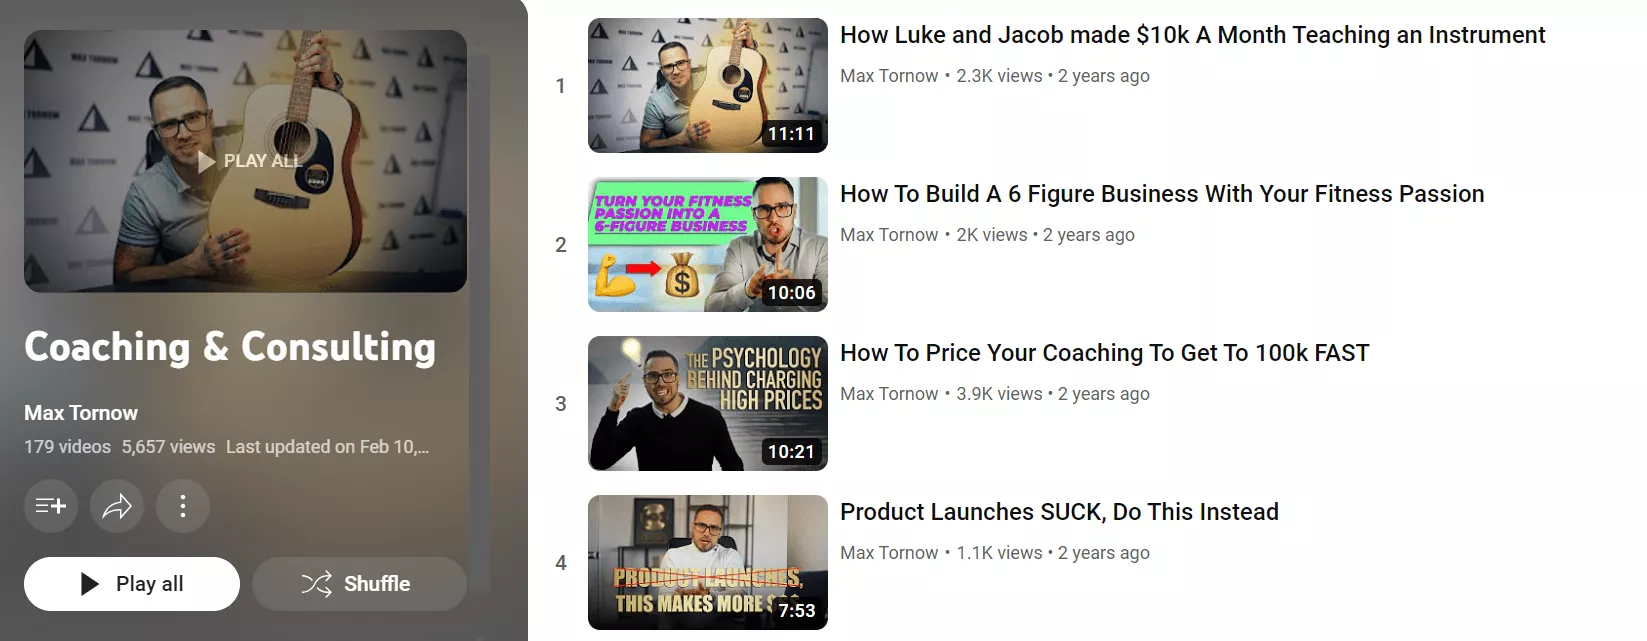 Max Tornow Coaching YouTube Channel